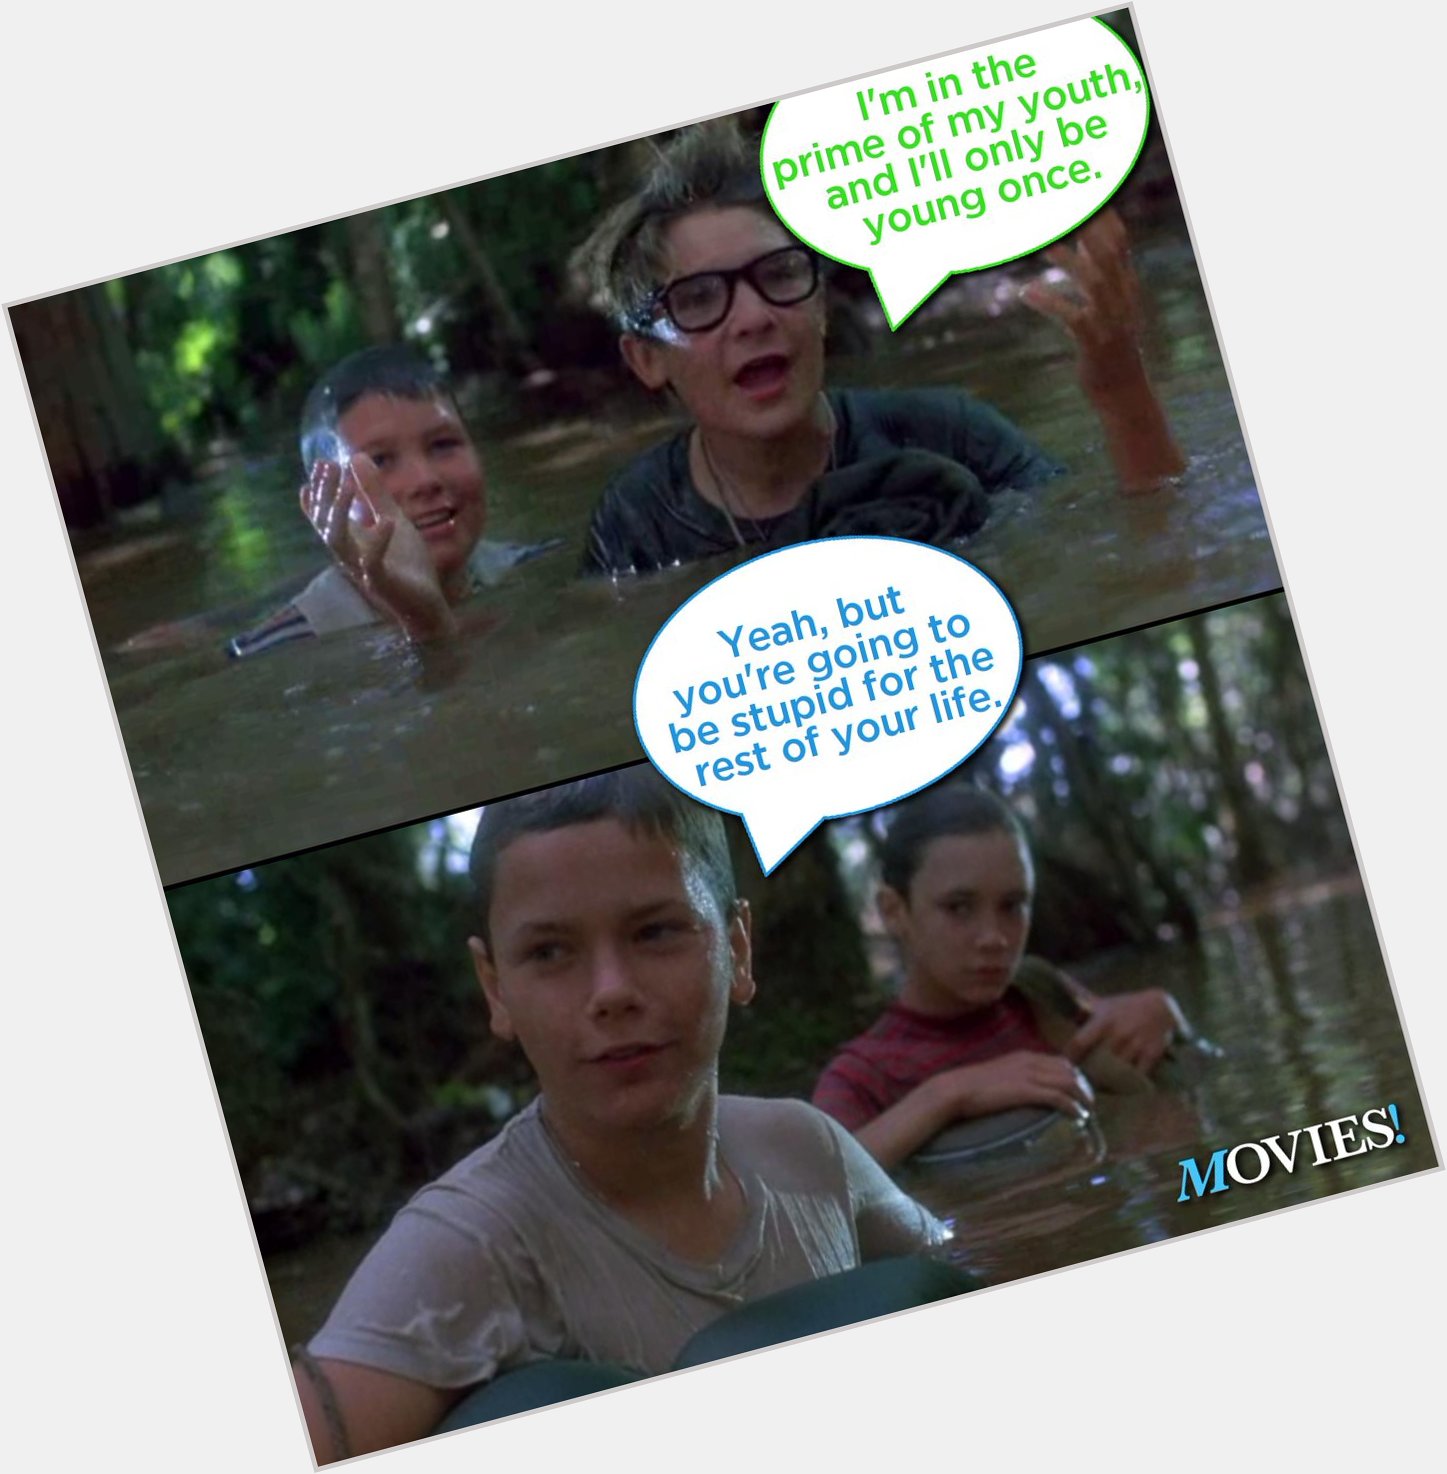 Happy Birthday Corey Feldman! 
Remember what his character\s name was in STAND BY ME? 